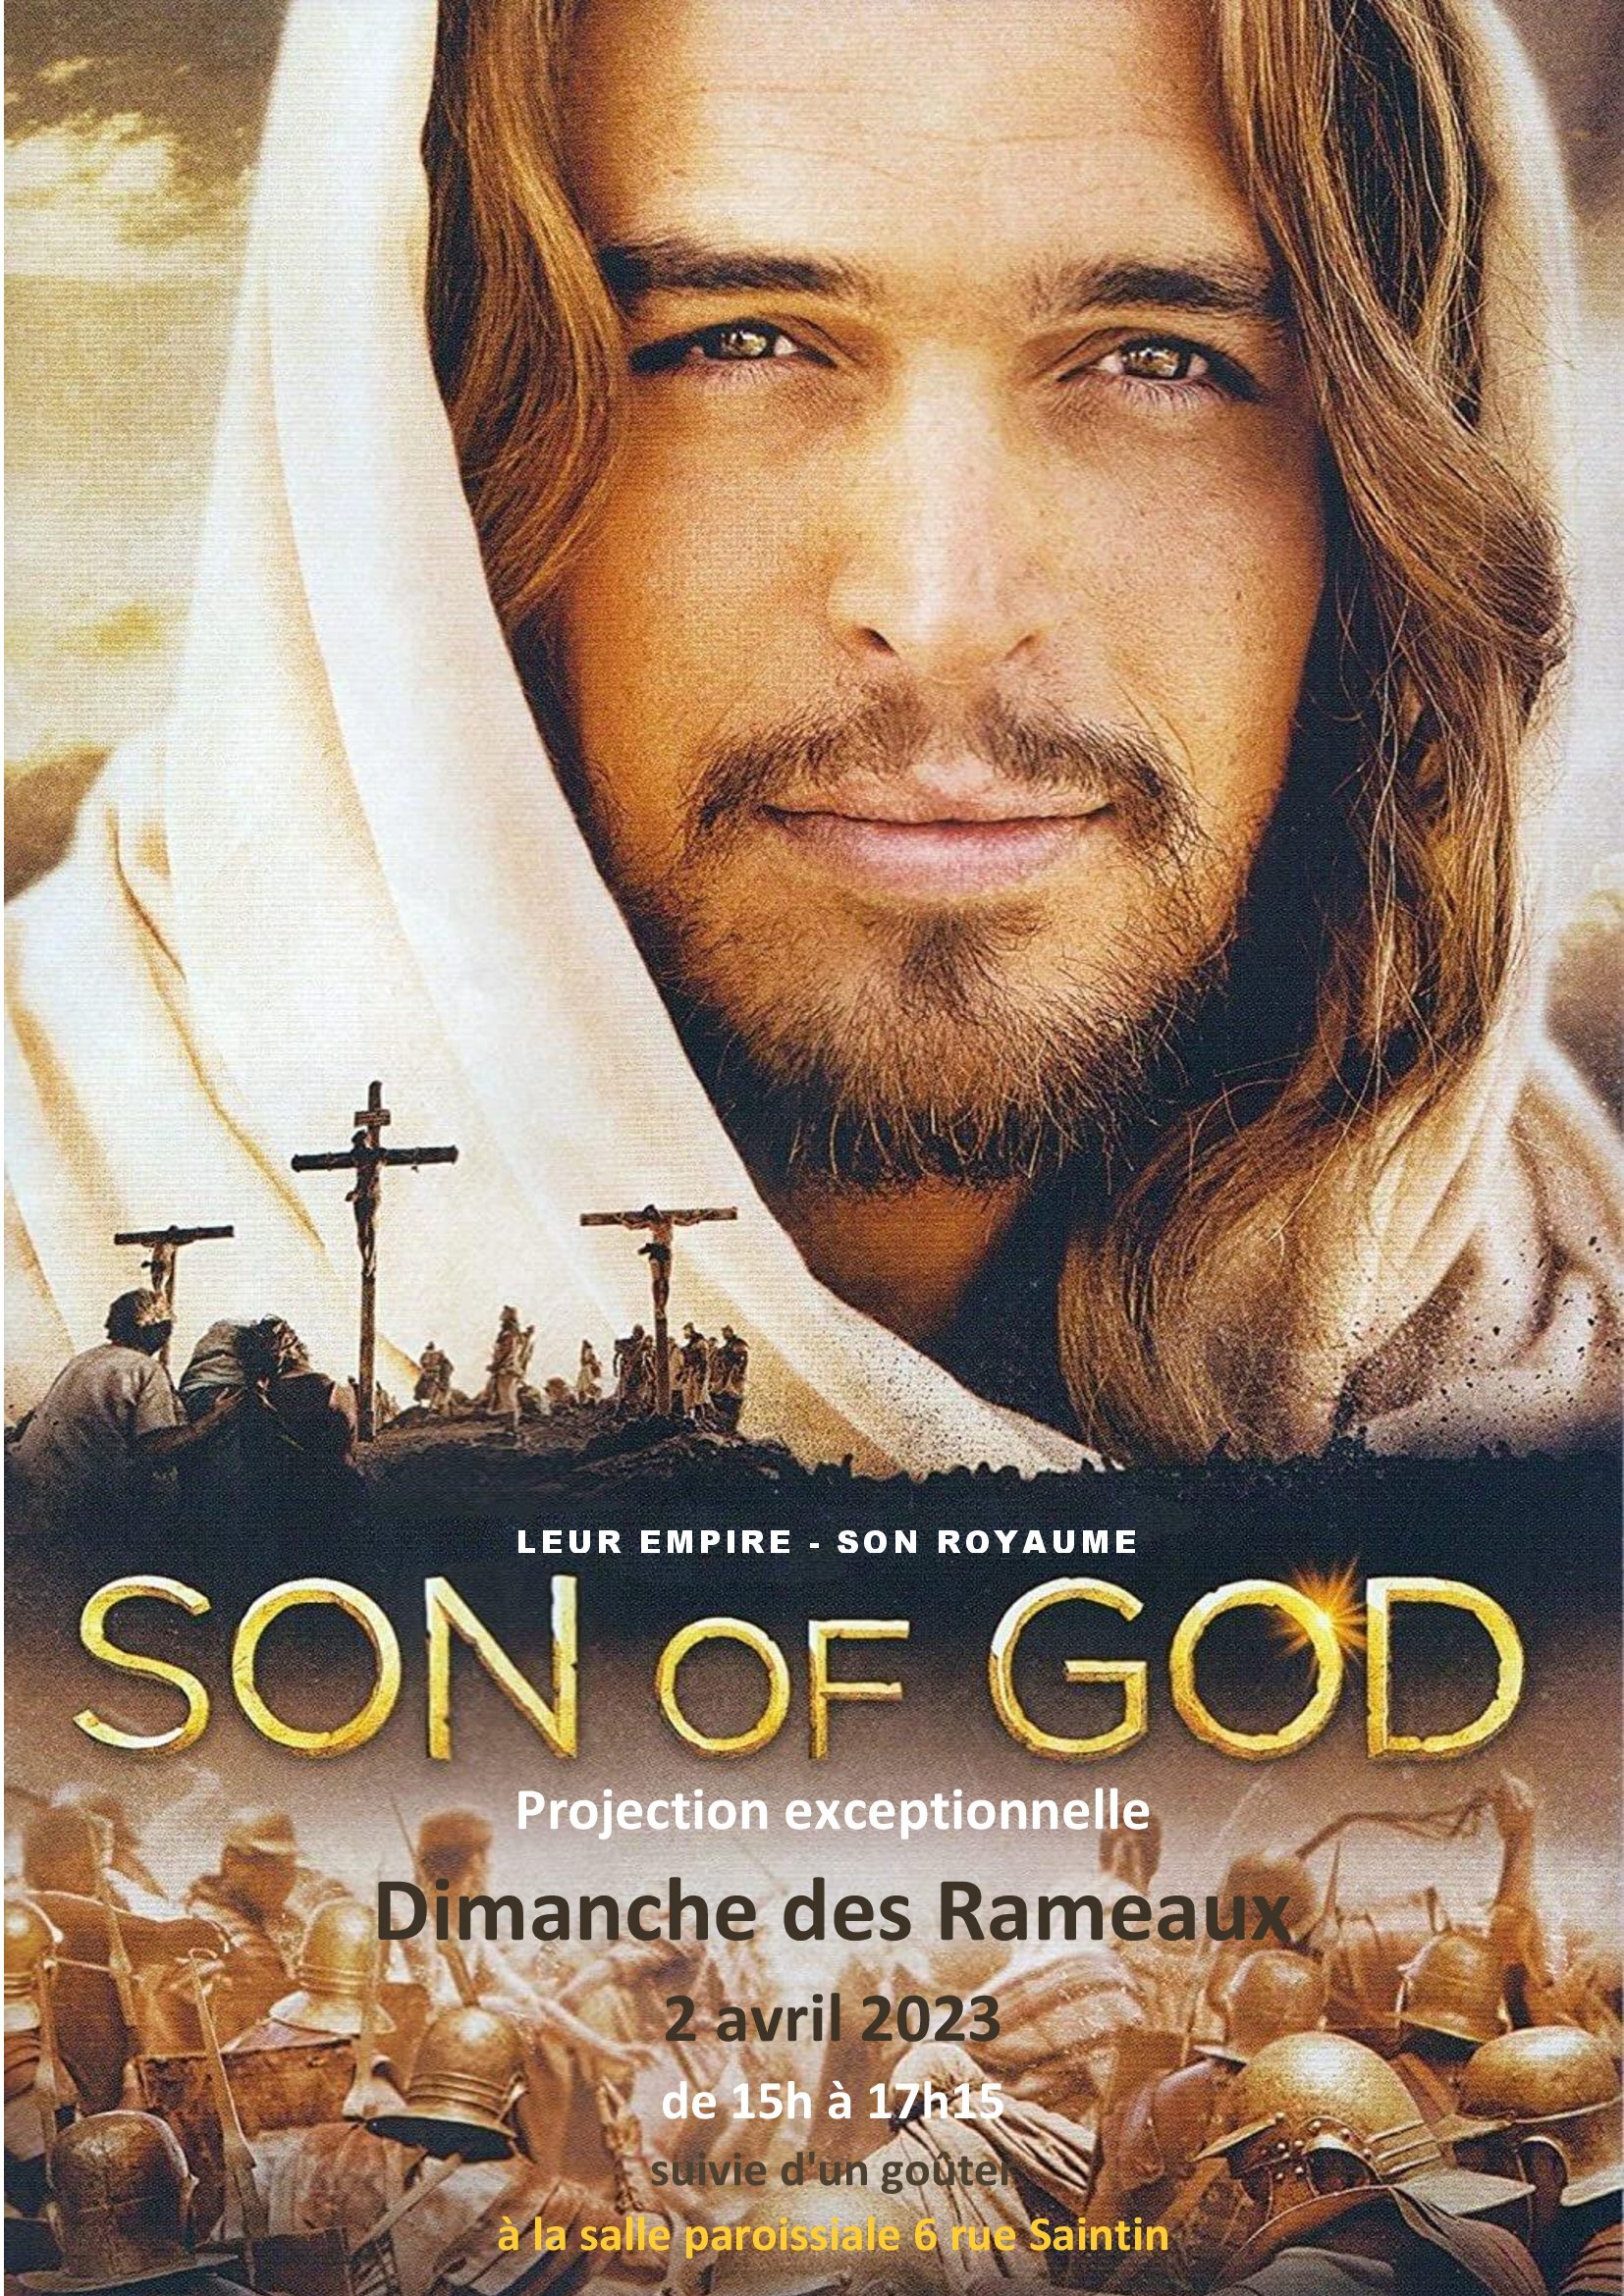 Affiche projection film Son of God 02.04.2023